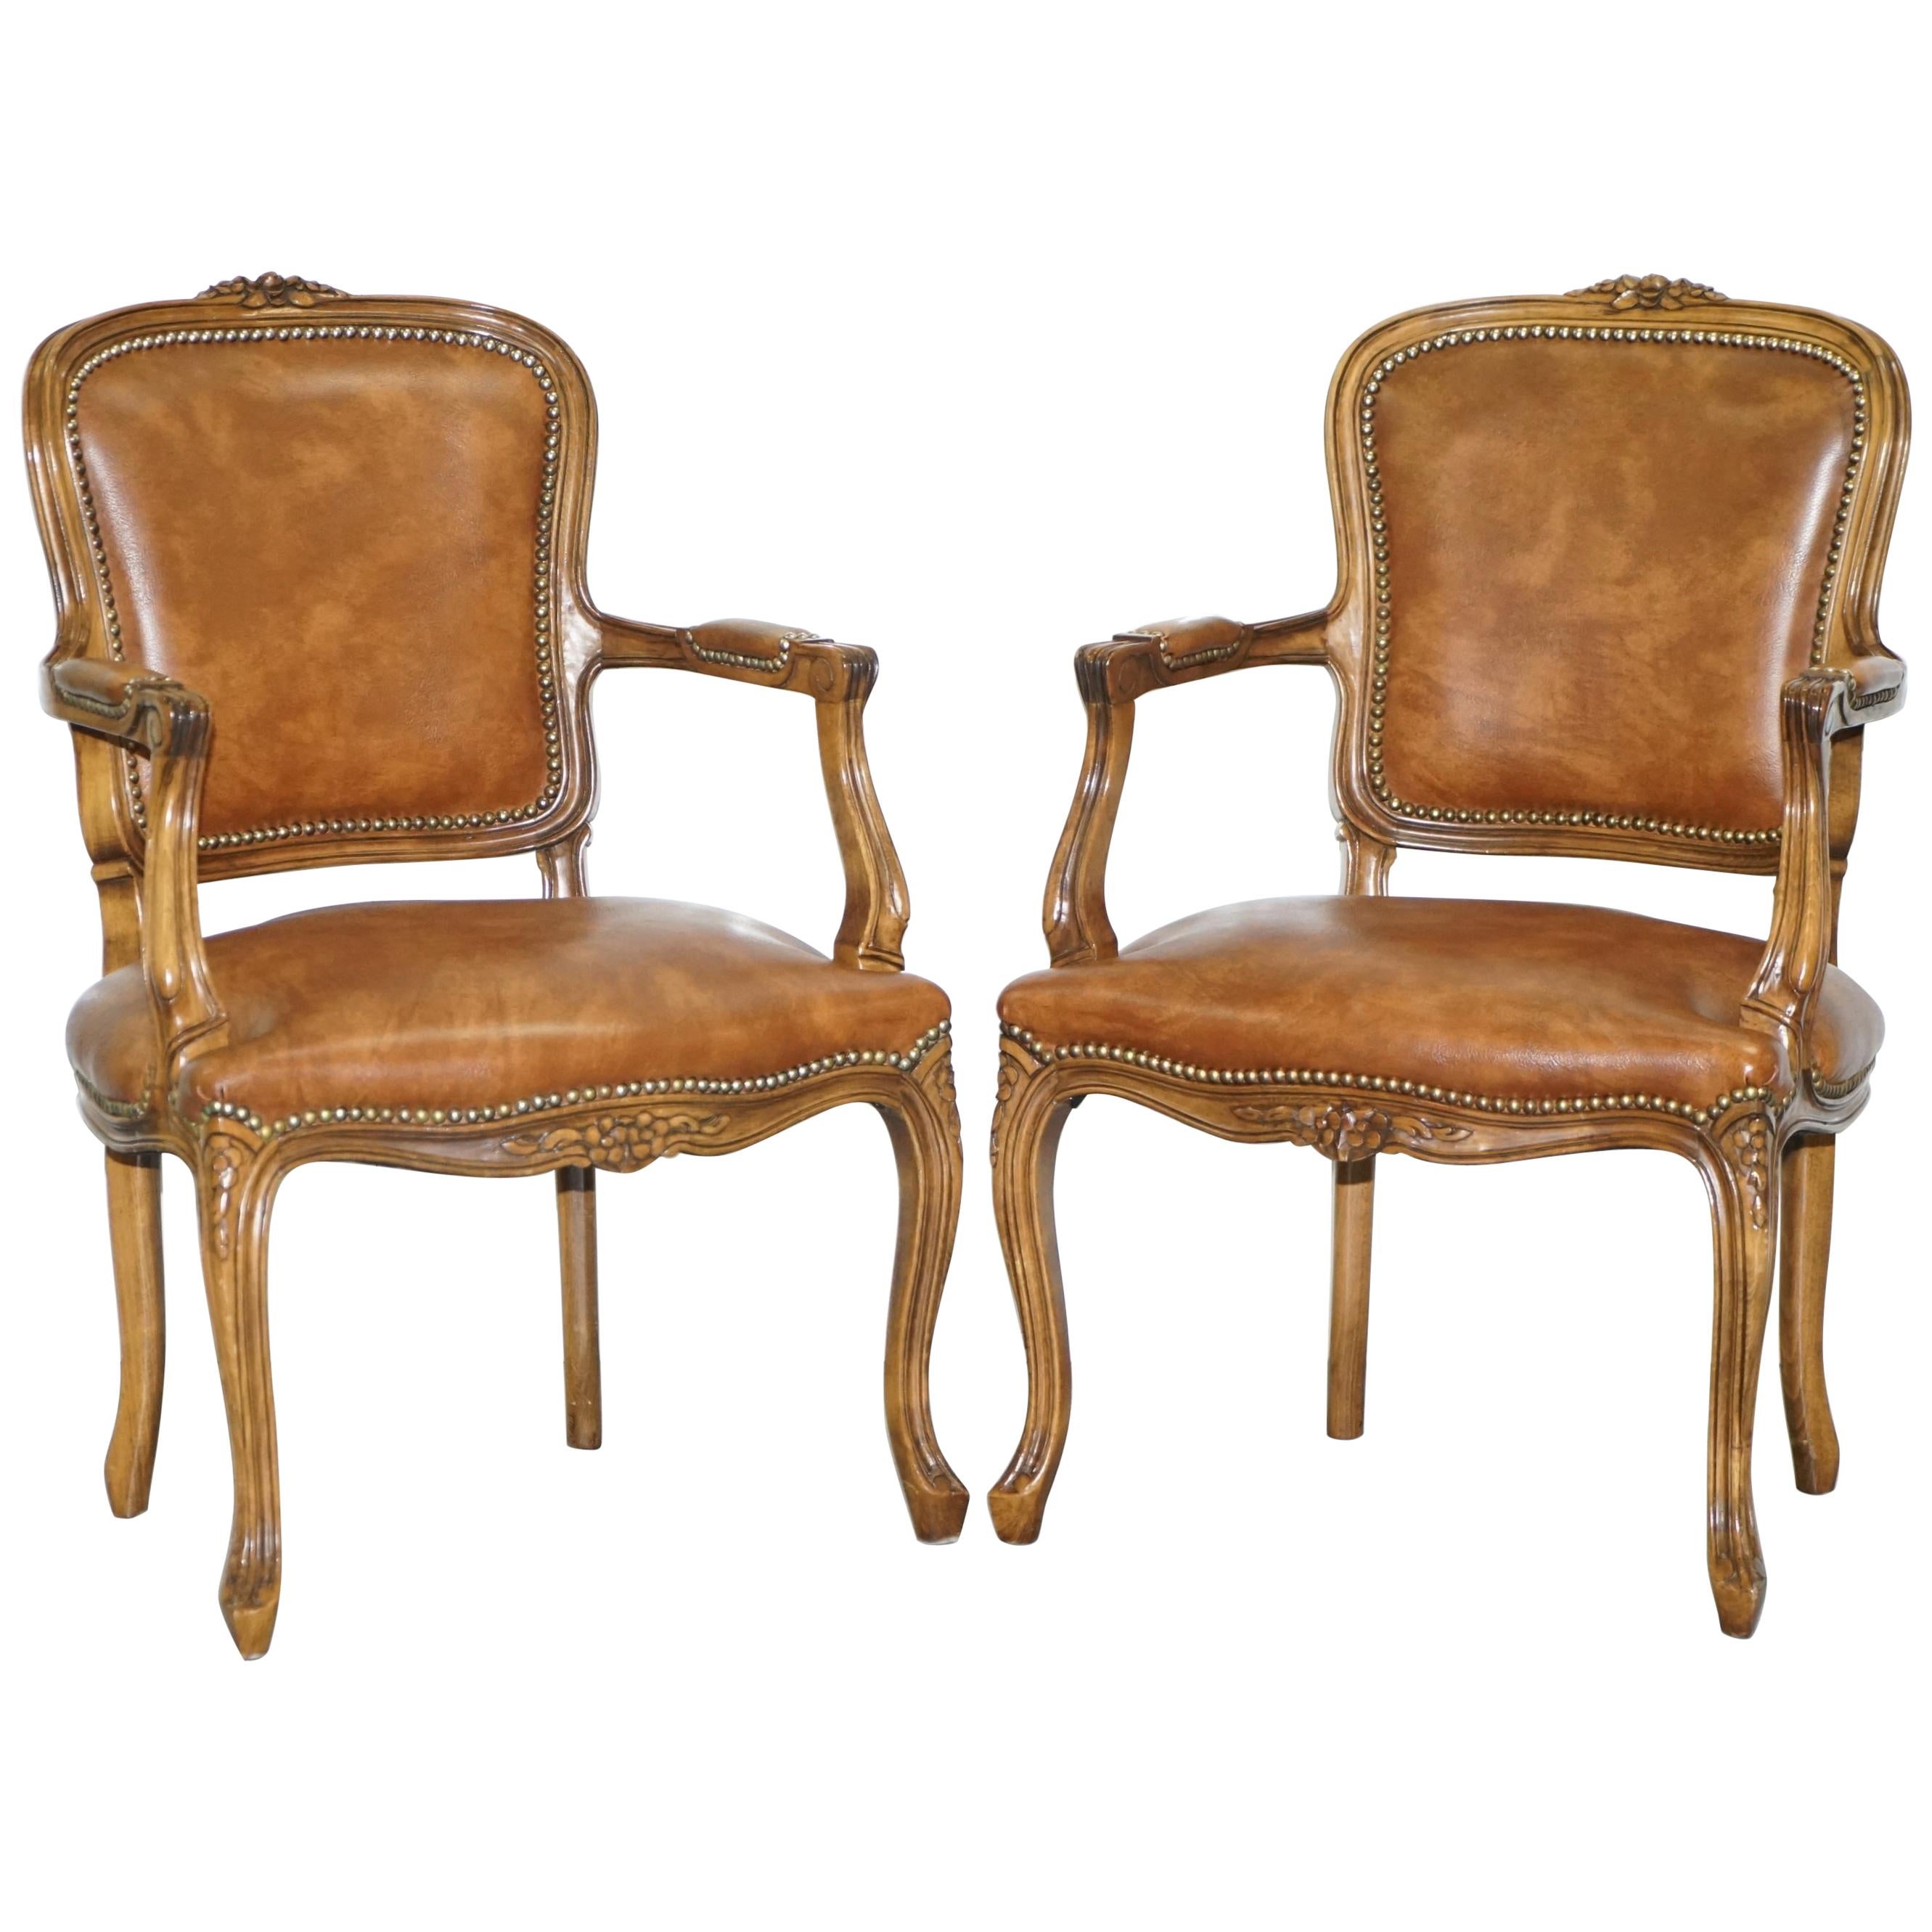 Pair of Lovely Vintage Aged Brown Leather French Louis XVII Fratelli Armchairs